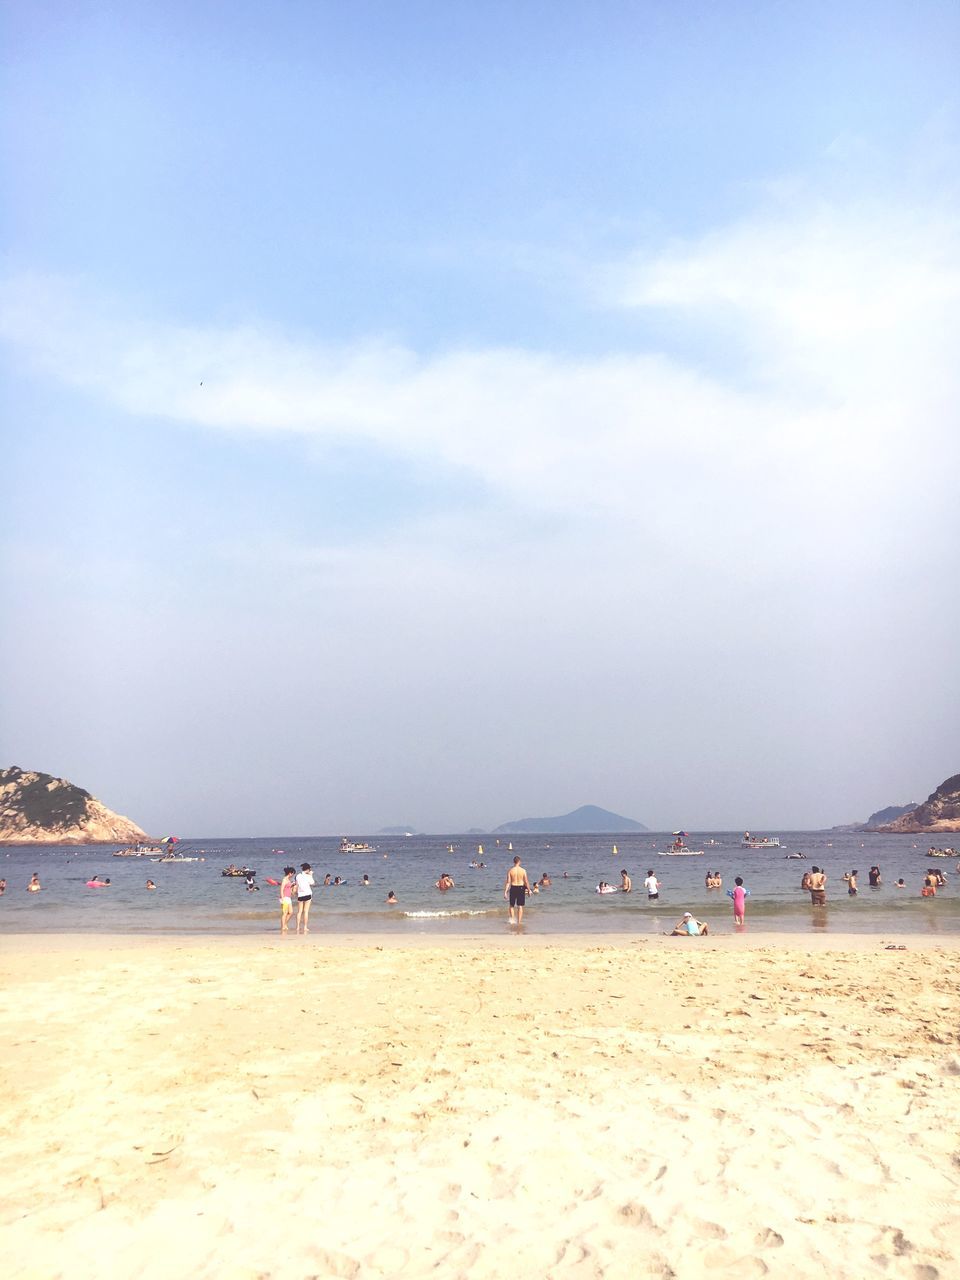 beach, sand, sea, shore, water, sky, large group of people, vacations, leisure activity, lifestyles, scenics, tranquil scene, tranquility, tourist, mixed age range, beauty in nature, horizon over water, nature, tourism, cloud - sky, enjoyment, coastline, summer, day, cloud, idyllic, outdoors, travel destinations, blue